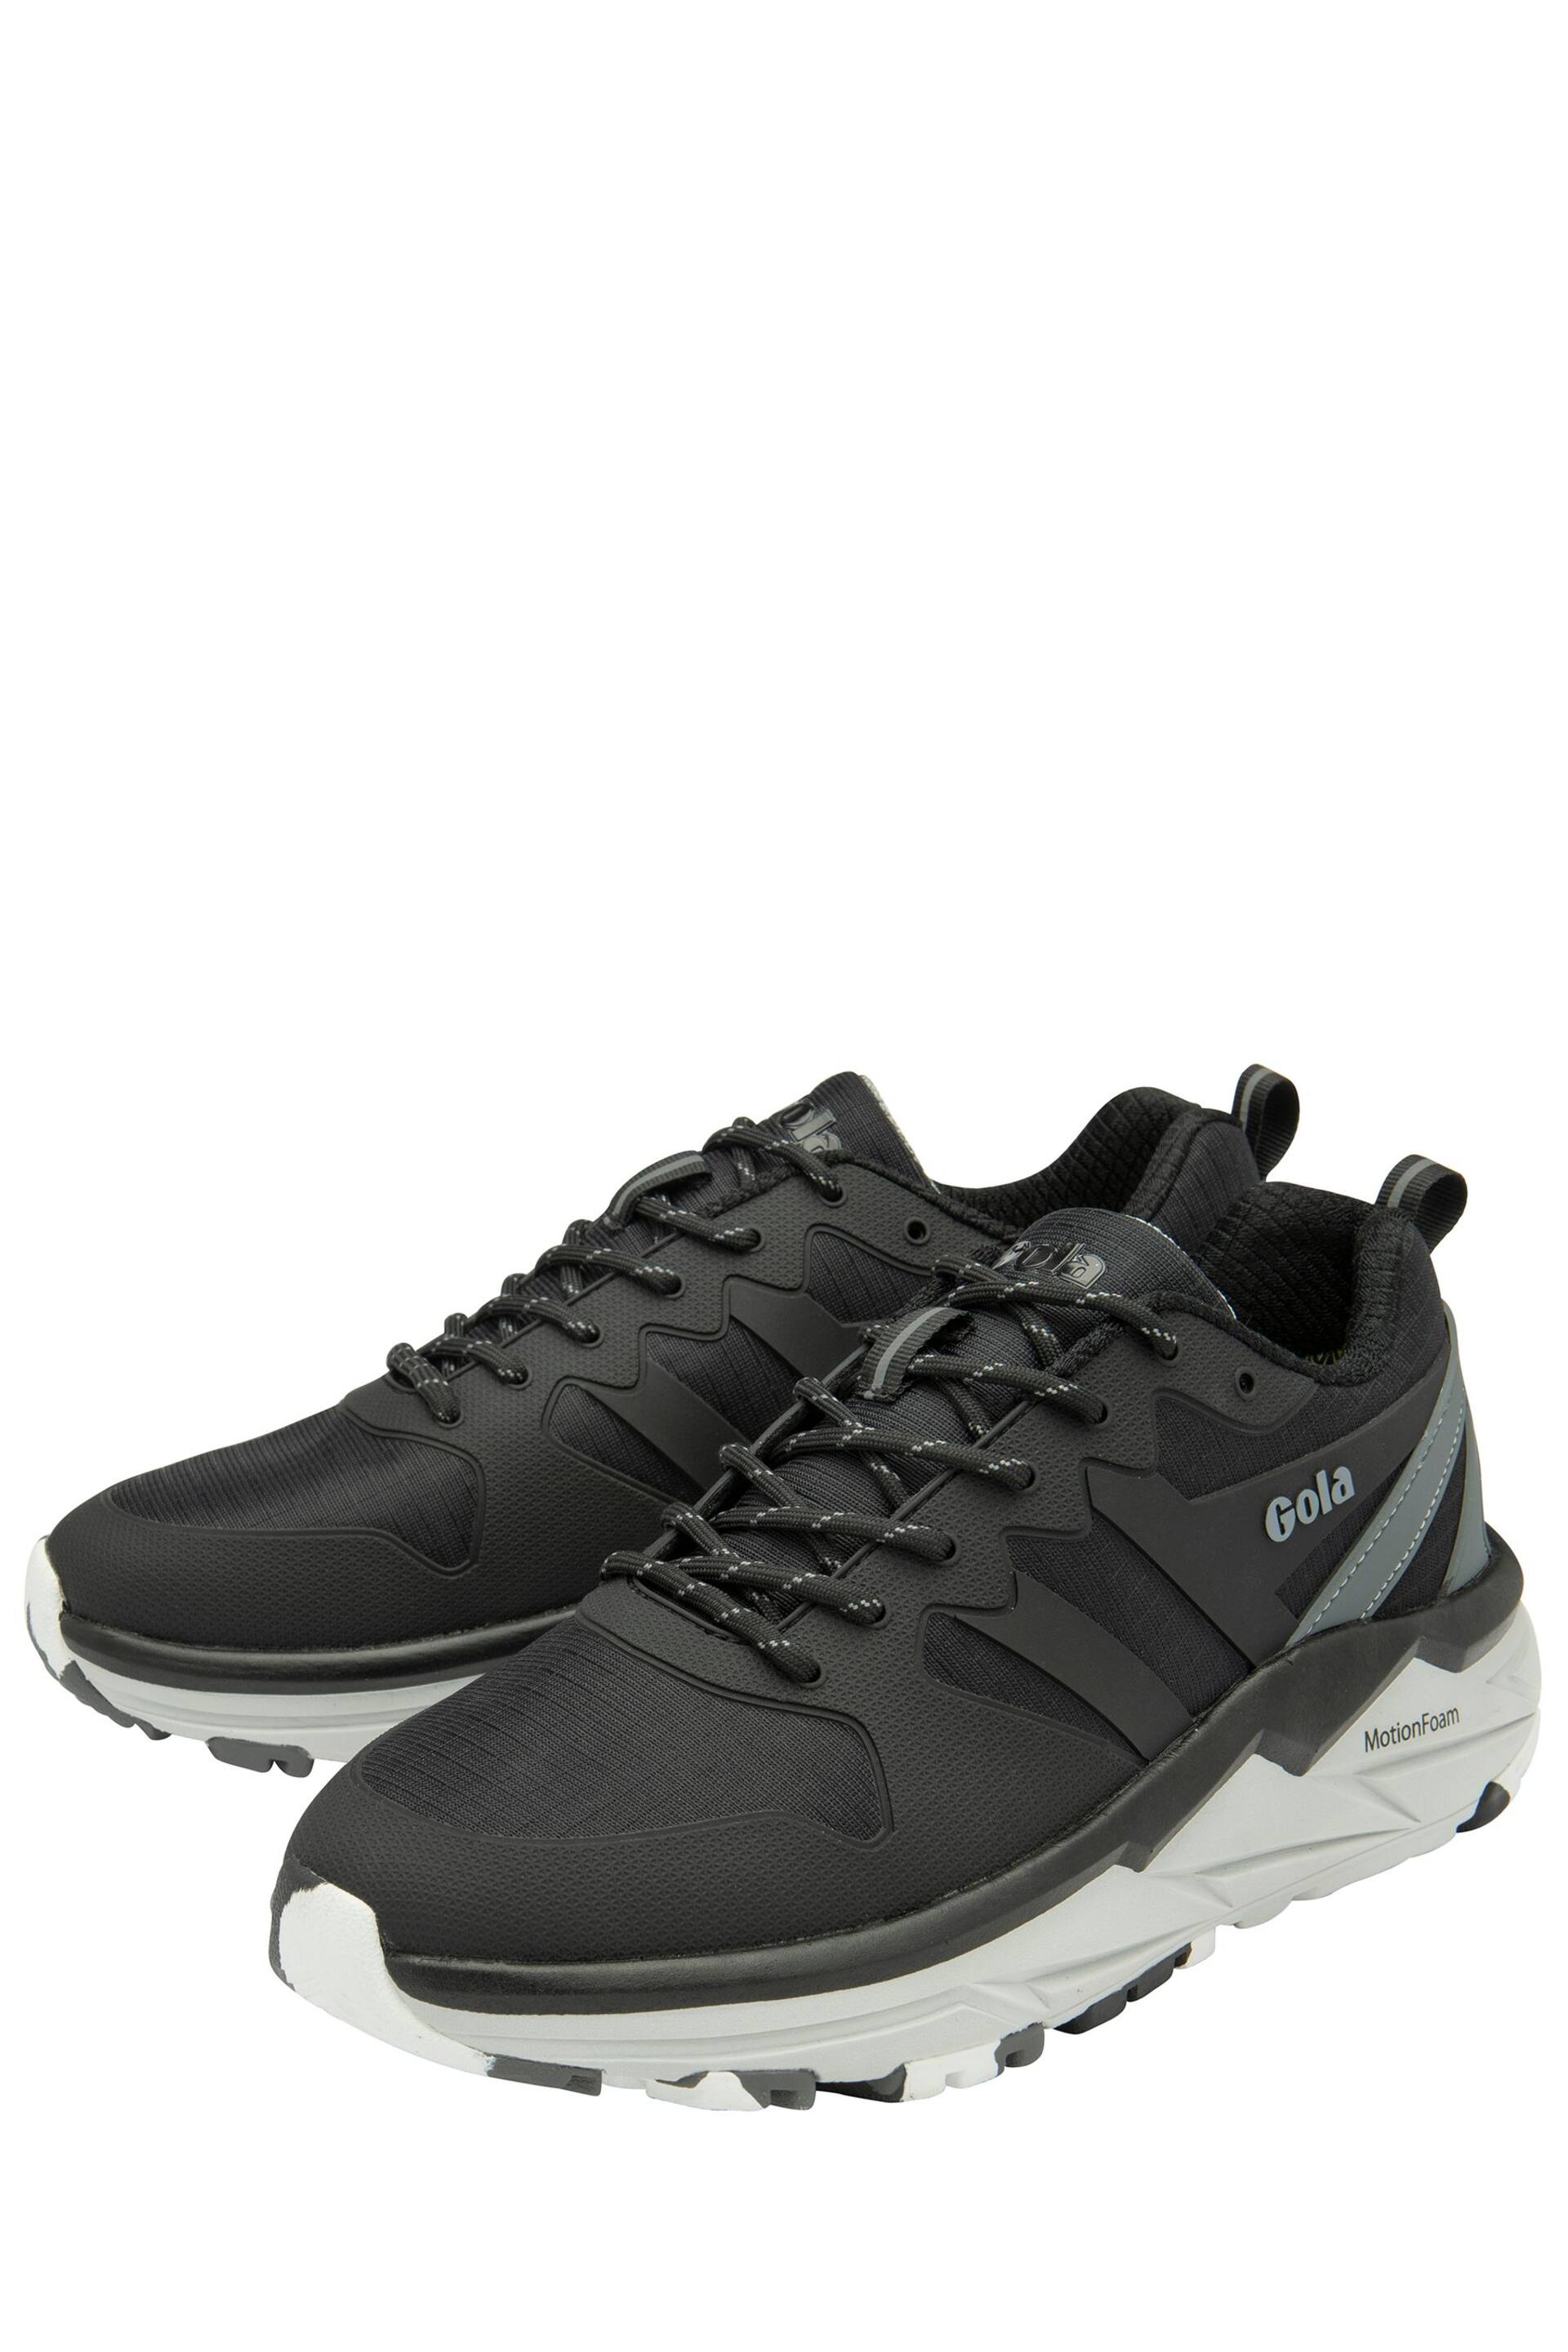 Gola Black Thunder 2 ATR Mesh Lace-Up Mens Running Trainers - Image 2 of 4